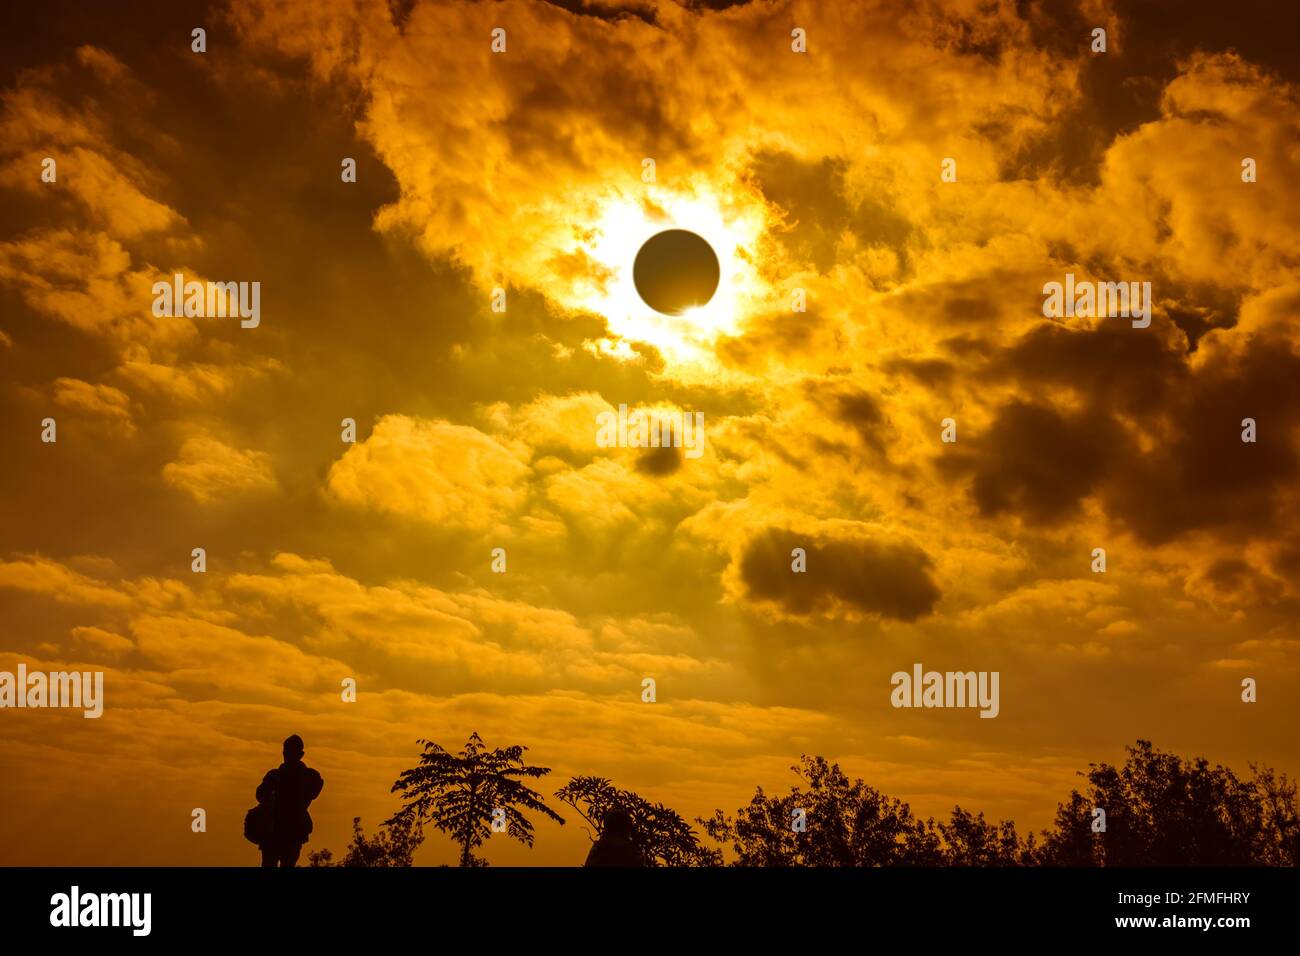 Amazing scientific natural phenomenon. The Moon covering the Sun. Silhouette of man admire the total solar eclipse with diamond ring glowing on golden Stock Photo